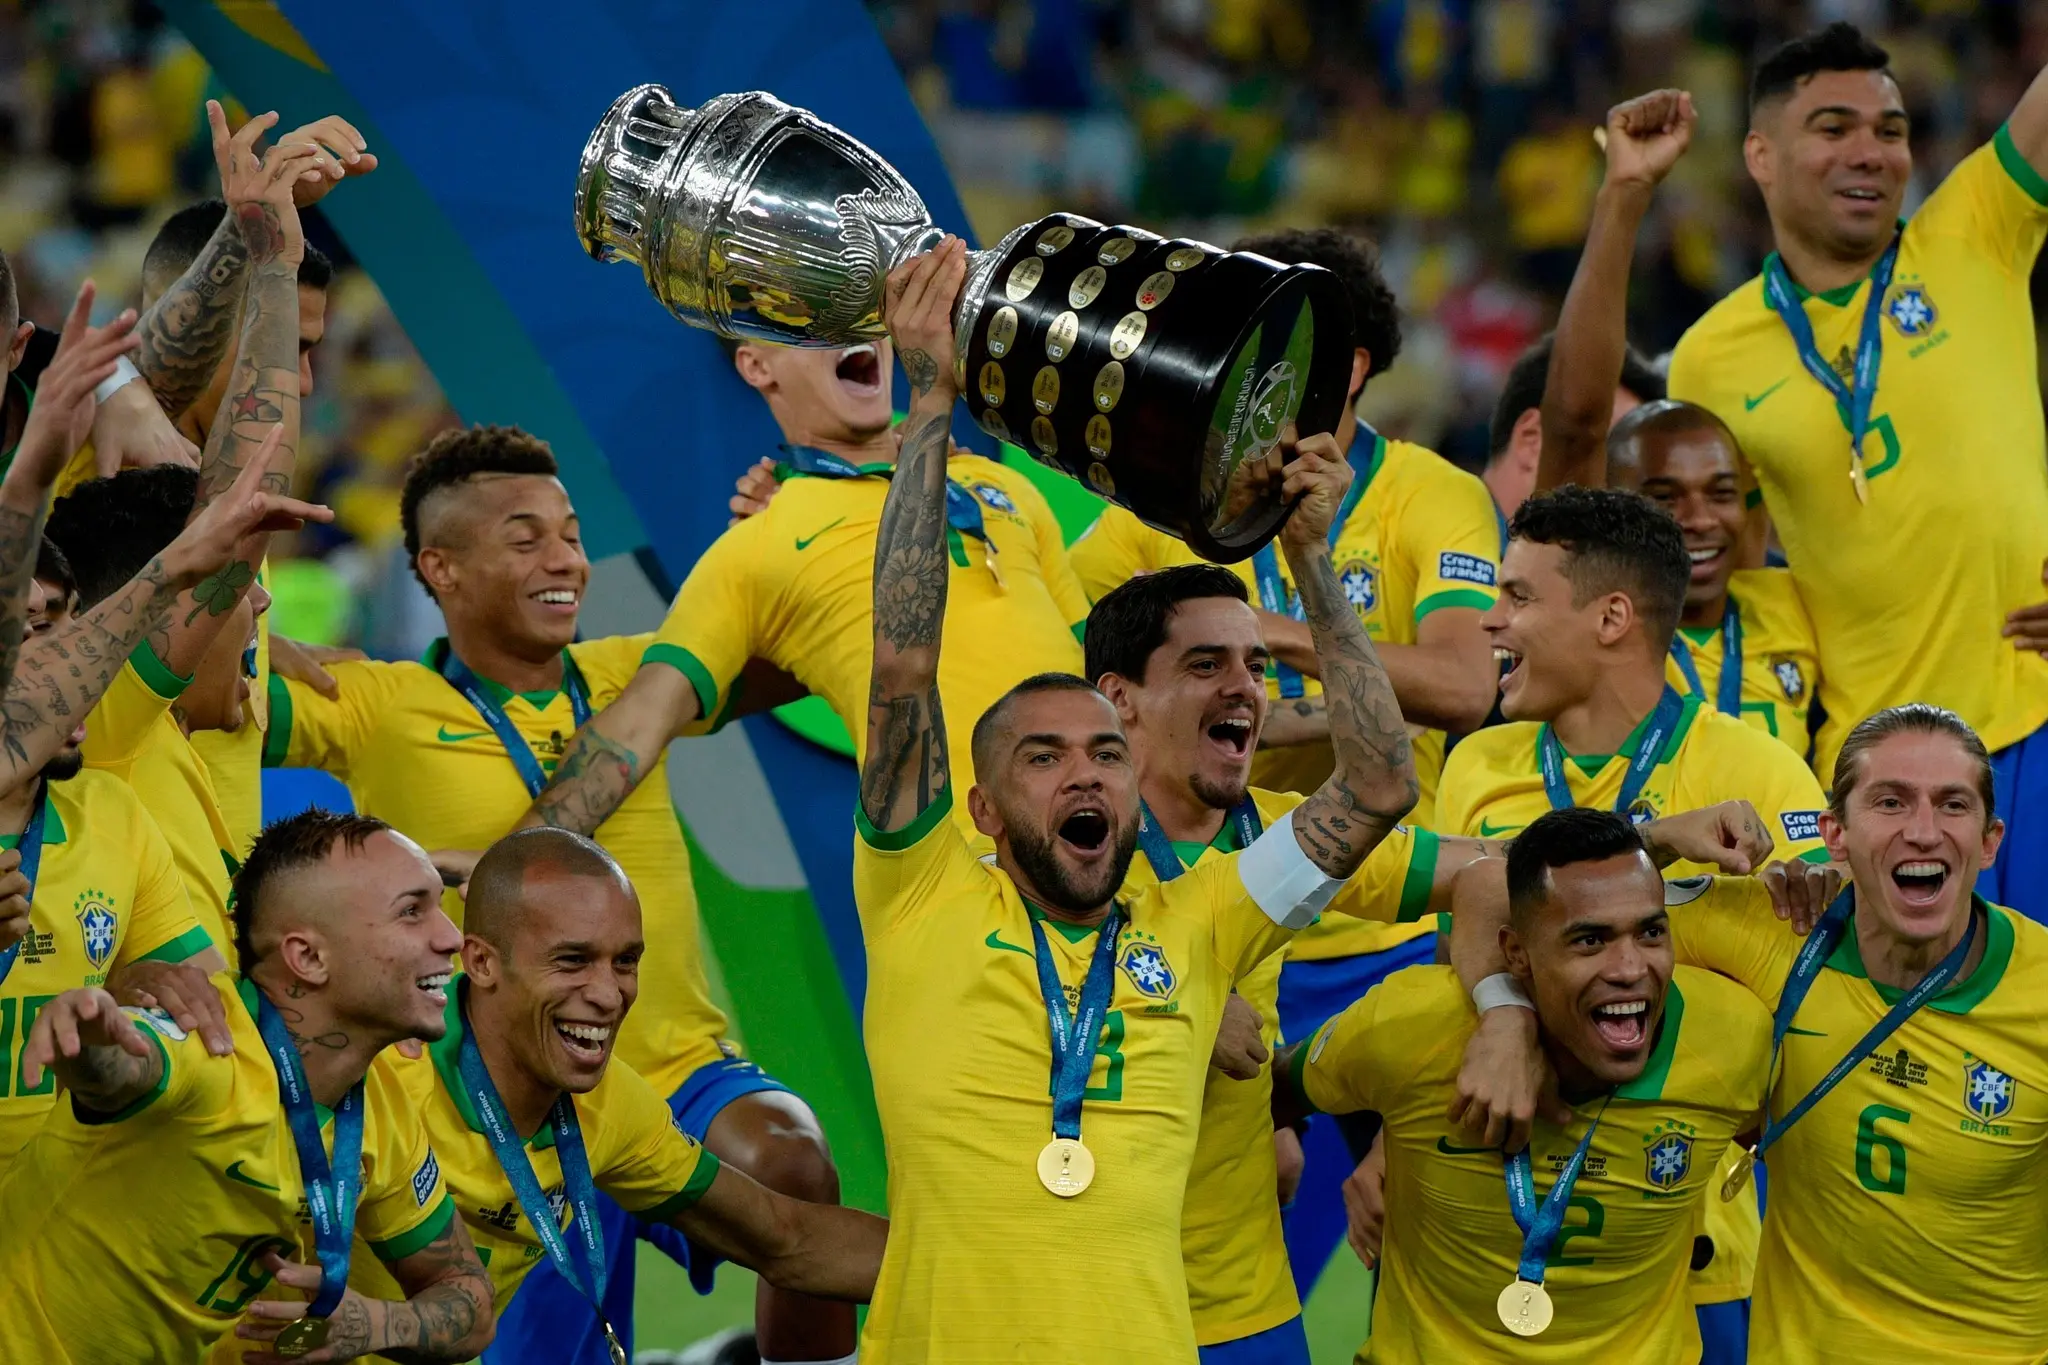 TOPSHOT - Brazil's Dani Alves (C) and teammates celebrates with the trophy after winning the Copa America after defeating Peru in the final match of the football tournament at Maracana Stadium in Rio de Janeiro, Brazil, on July 7, 2019. (Photo by Juan MABROMATA / AFP) (Photo credit should read JUAN MABROMATA/AFP via Getty Images)